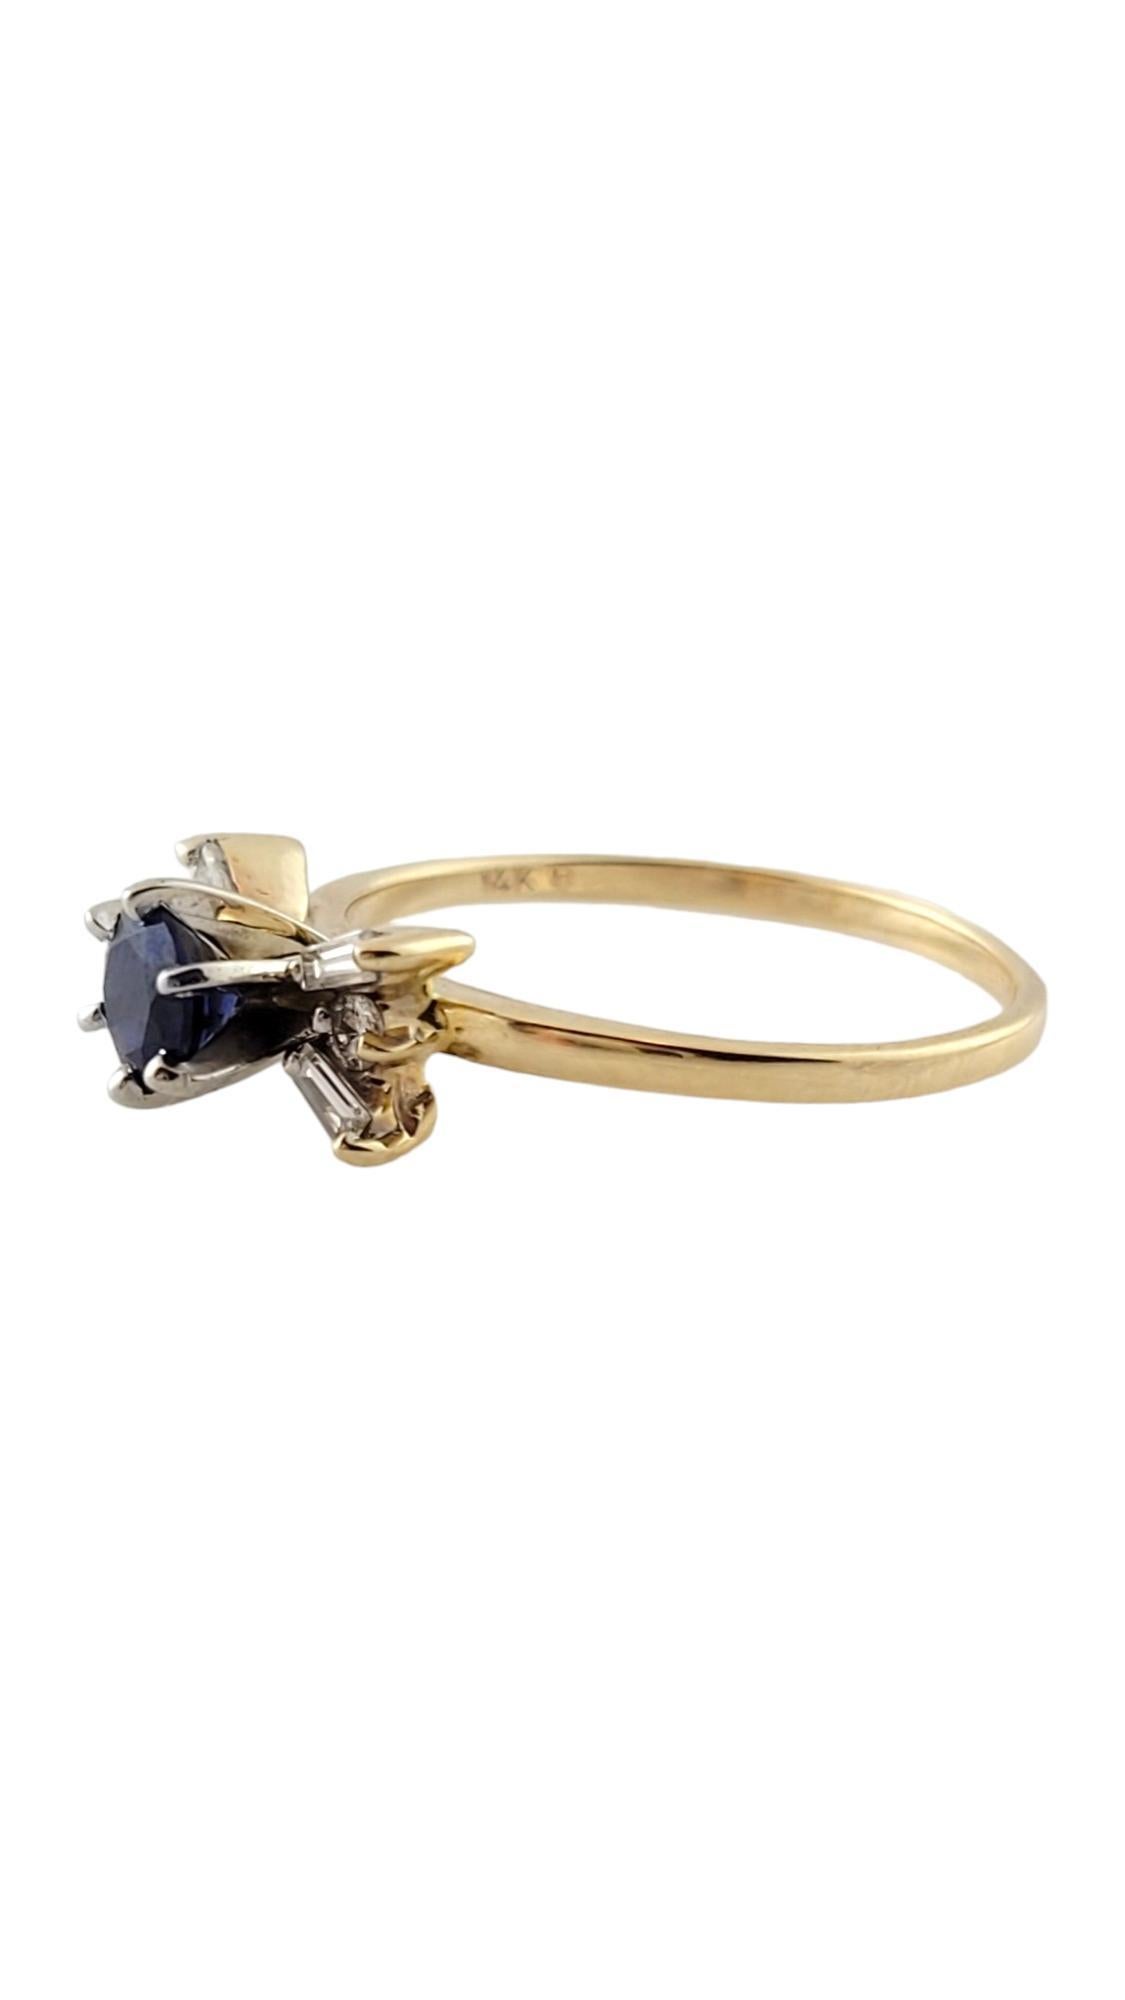 Vintage 14K Yellow Gold Blue Tanzanite and Diamond Ring Size 8.25

This stunning piece features a beautiful lab tested blue tanzanite stone with 2 round cut diamonds and 4 baguette cut diamonds all set in 14K yellow gold for a breathe taking